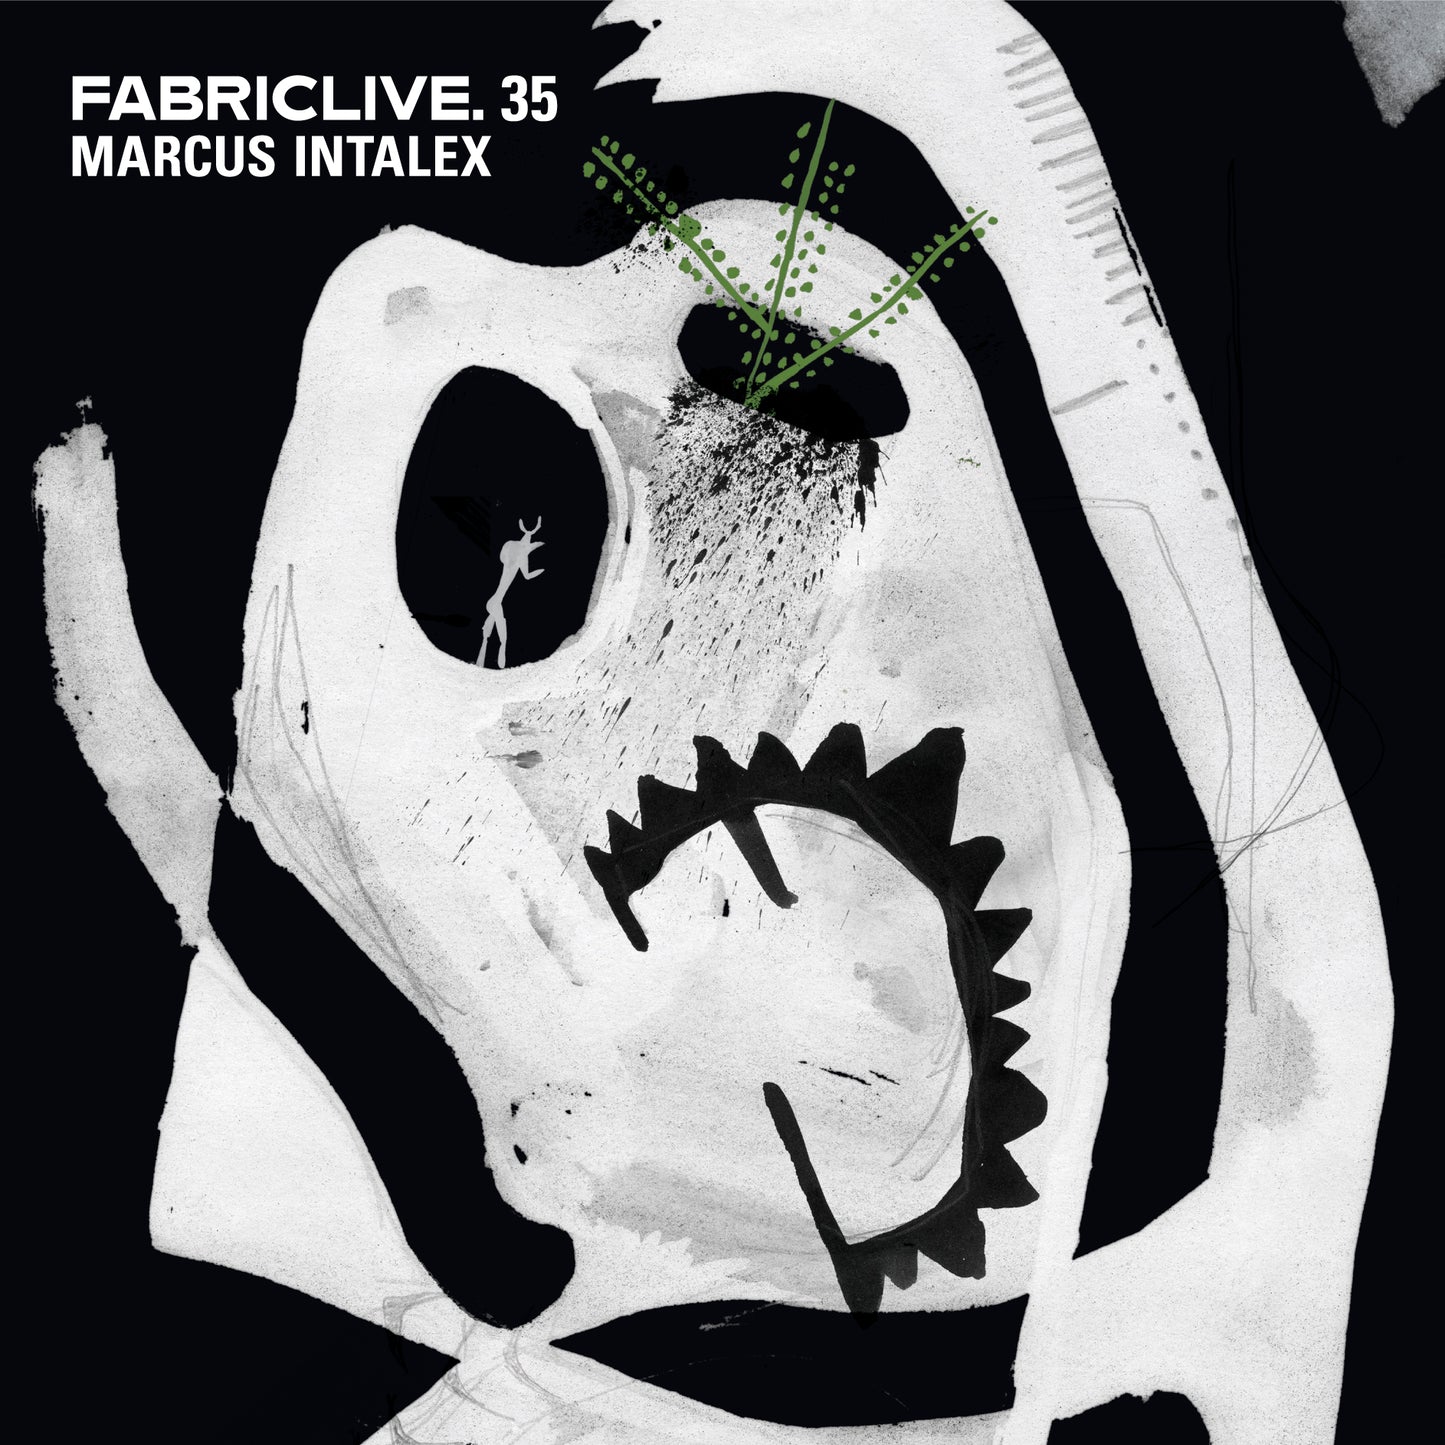 Marcus Intalex - FABRICLIVE 35 CD